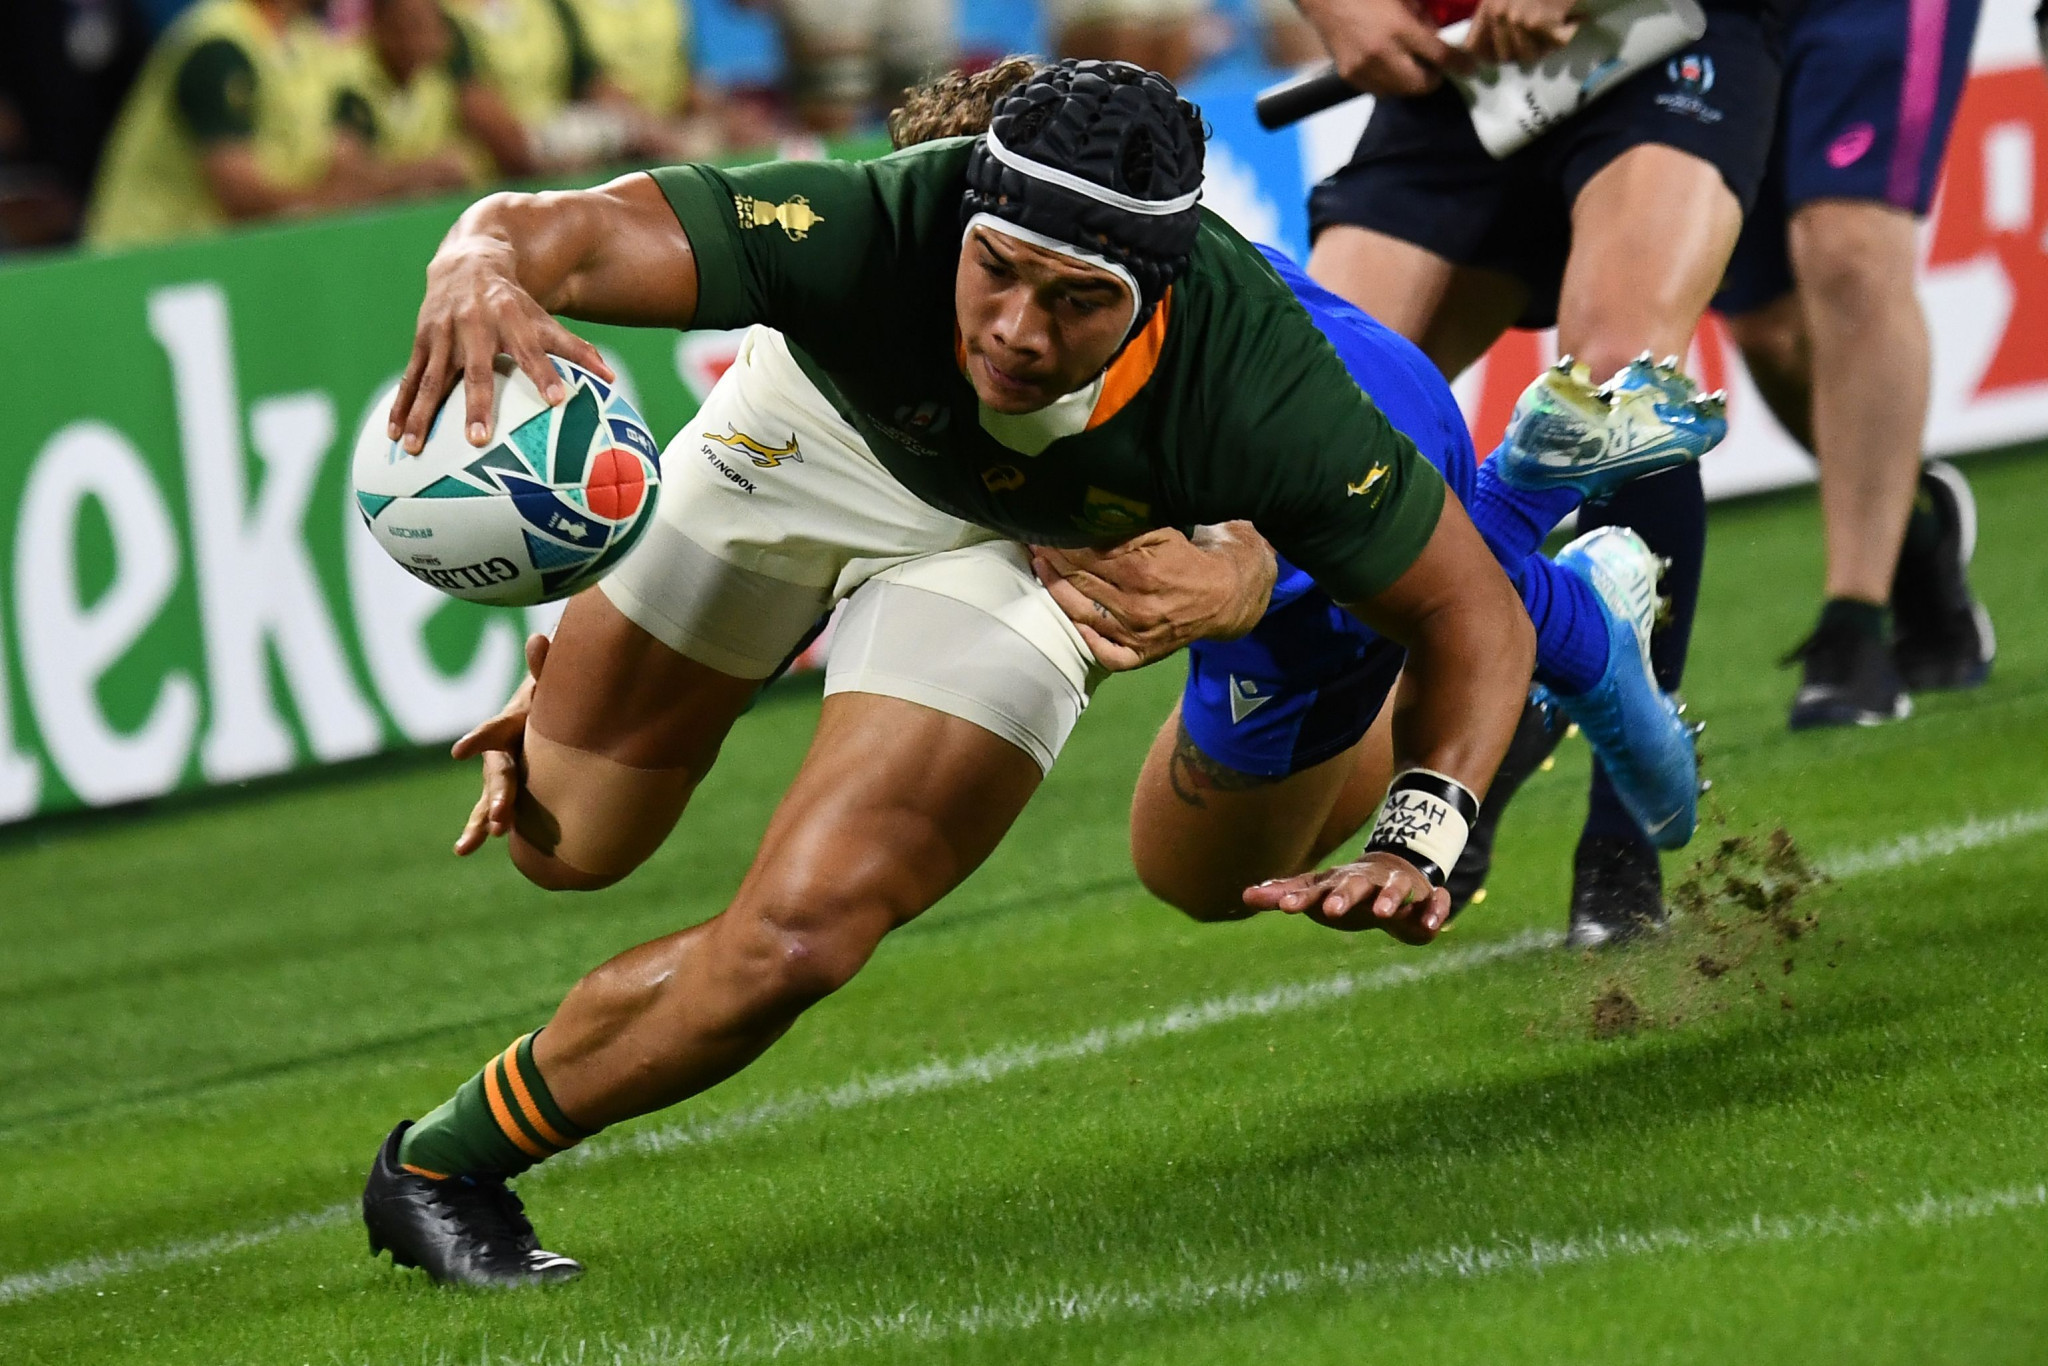 Italy battered by brutal South Africa at Rugby World Cup